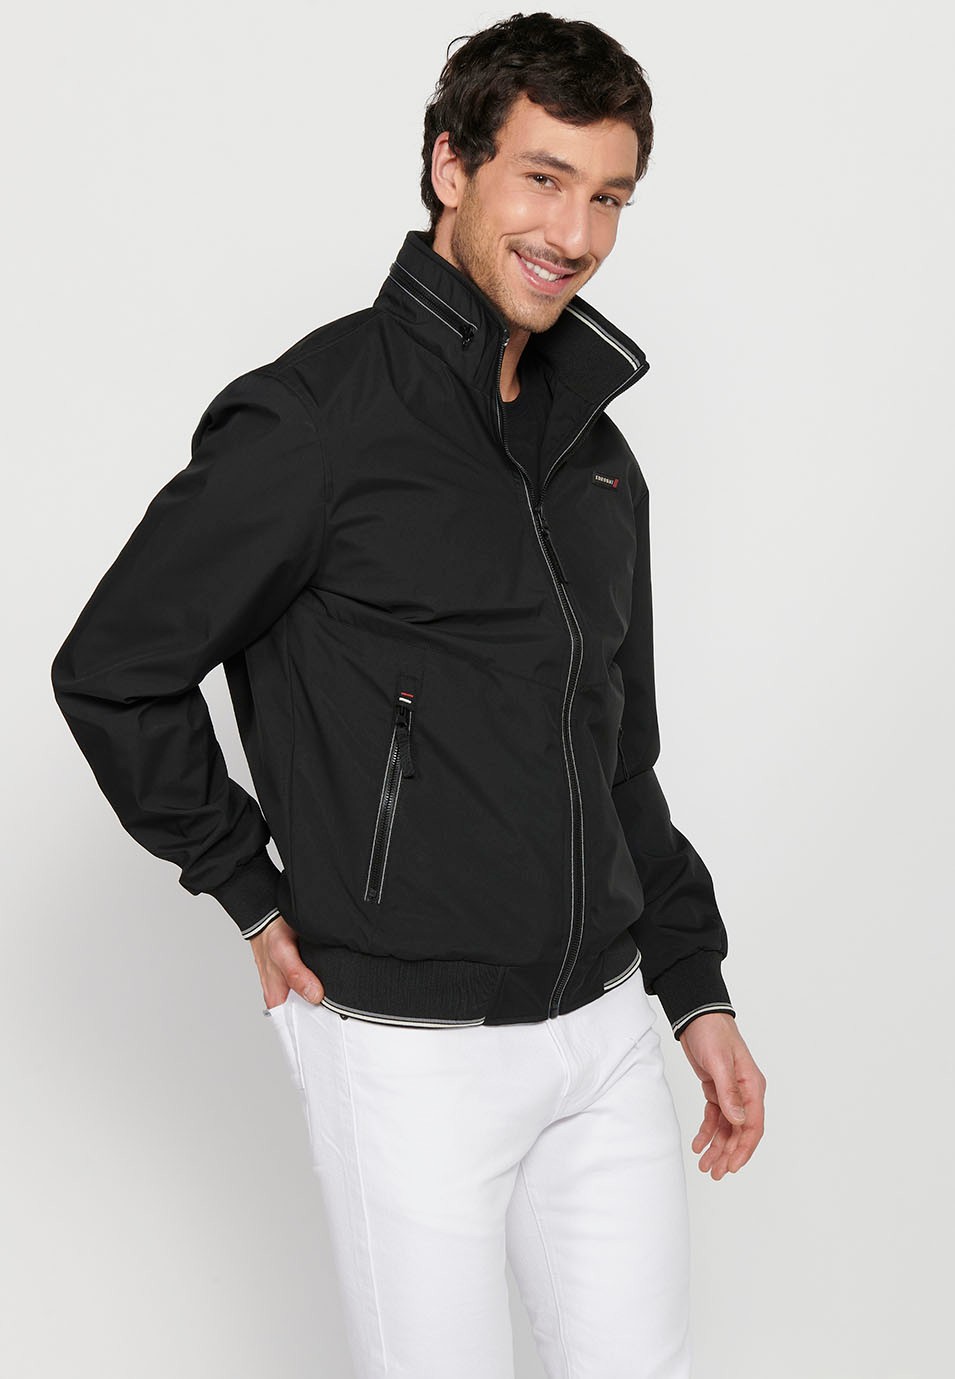 Long-sleeved high-neck windbreaker jacket with front zipper closure and ribbed finishes with pockets, one inside in Black for Men 7